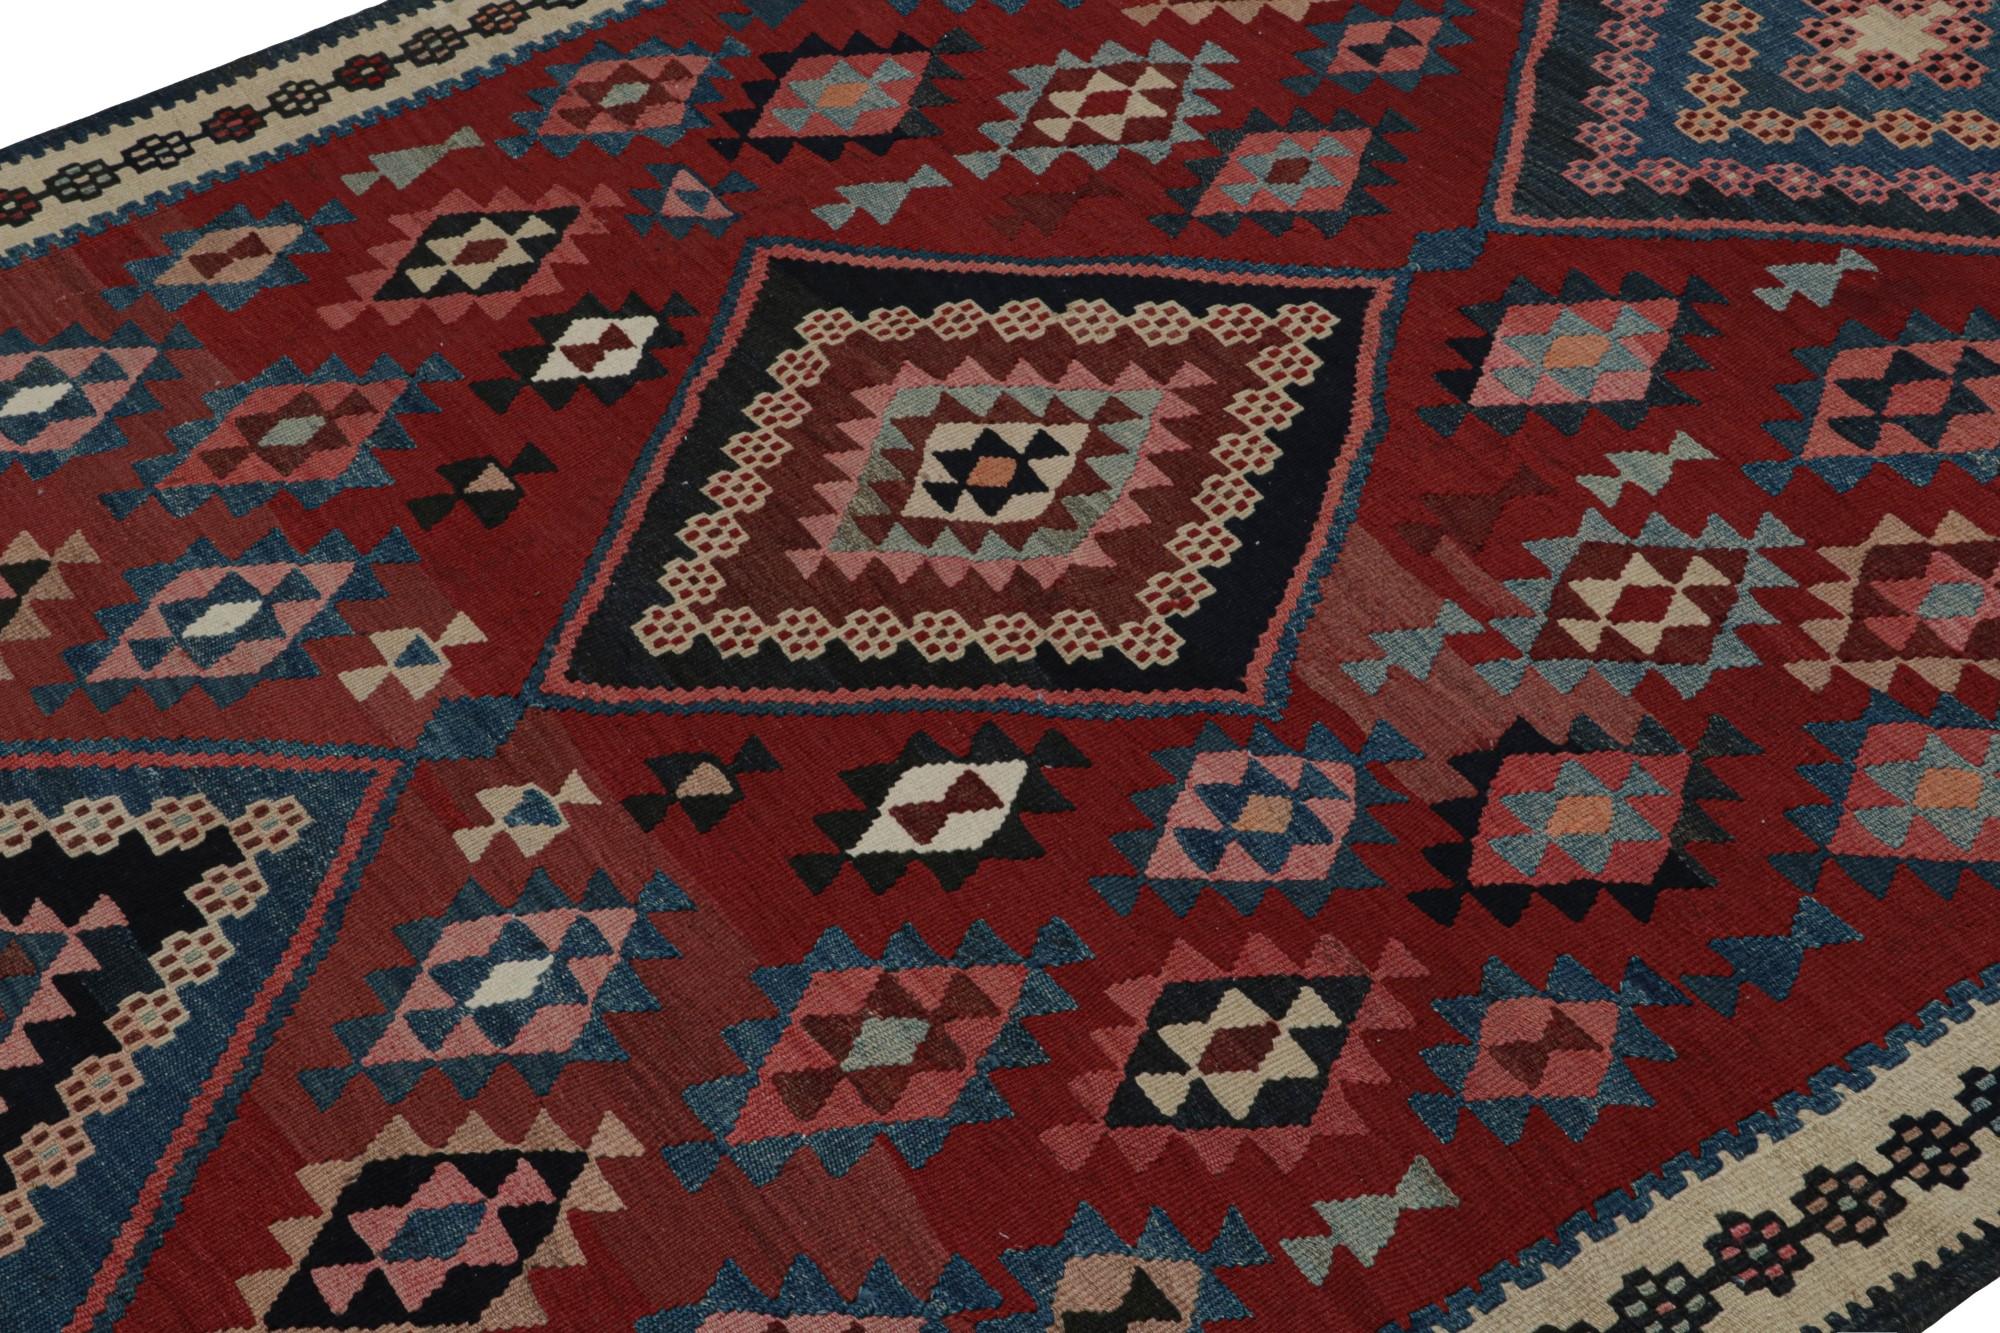 Hand-Knotted Rug & Kilim’s Mashwani Afghan Baluch rug in Red & Blue Geometric Patterns For Sale